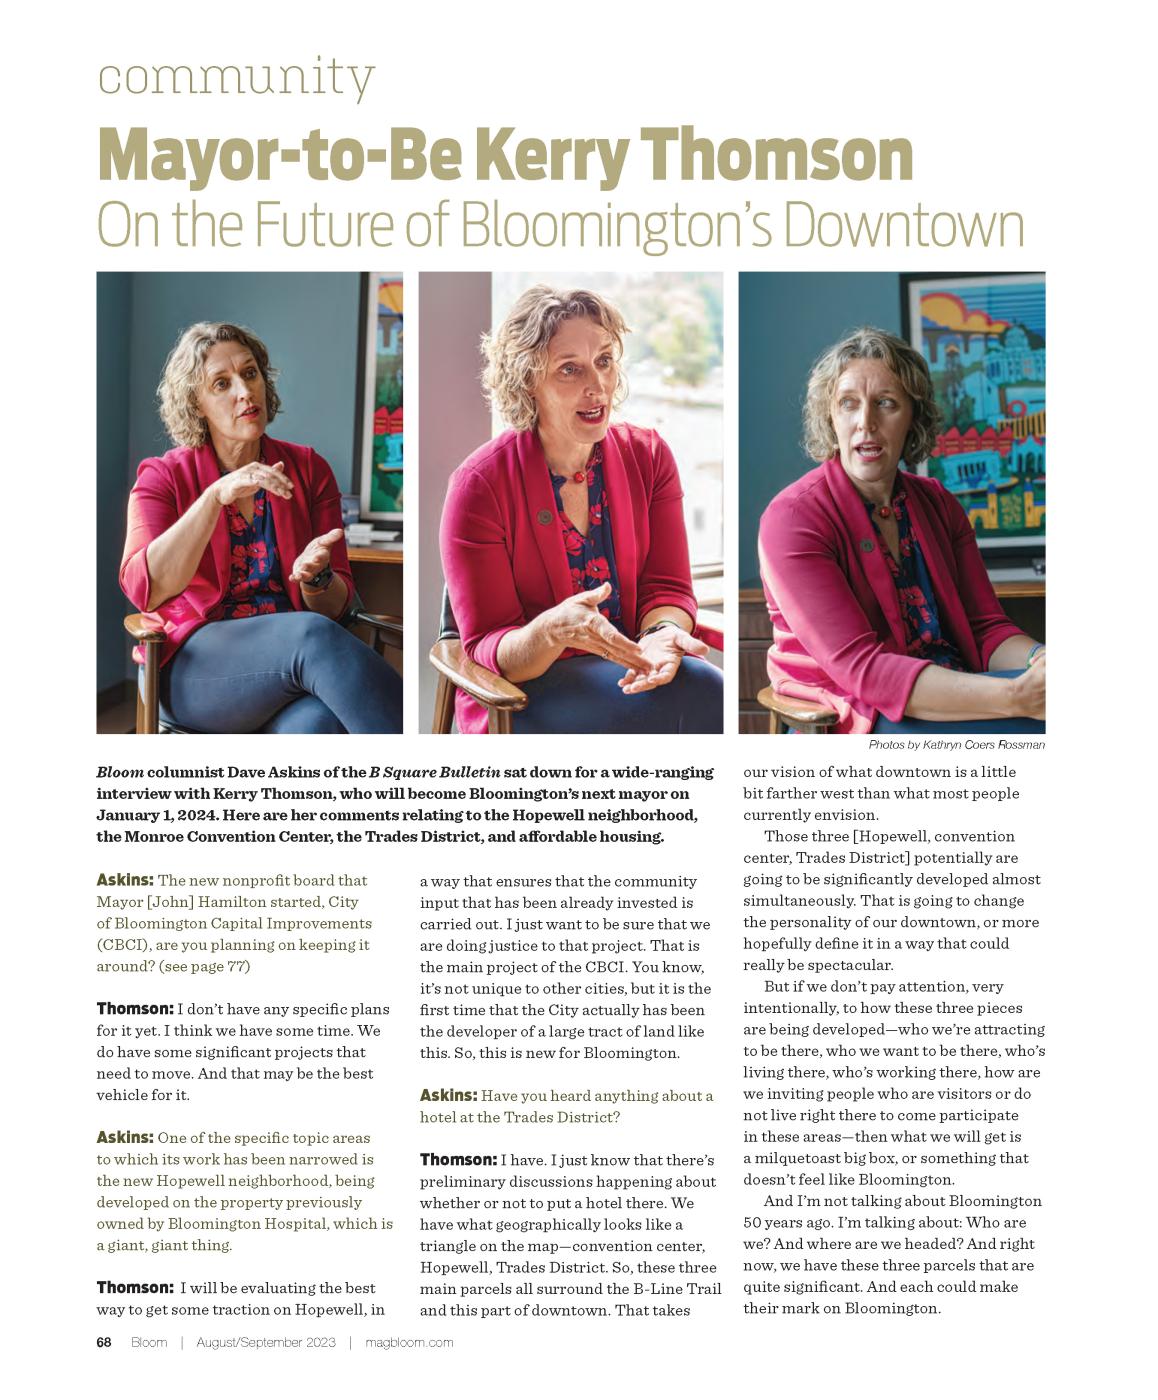 Kerry Thomson, democratic nomin...hotos by Kathryn Coers Rossman.